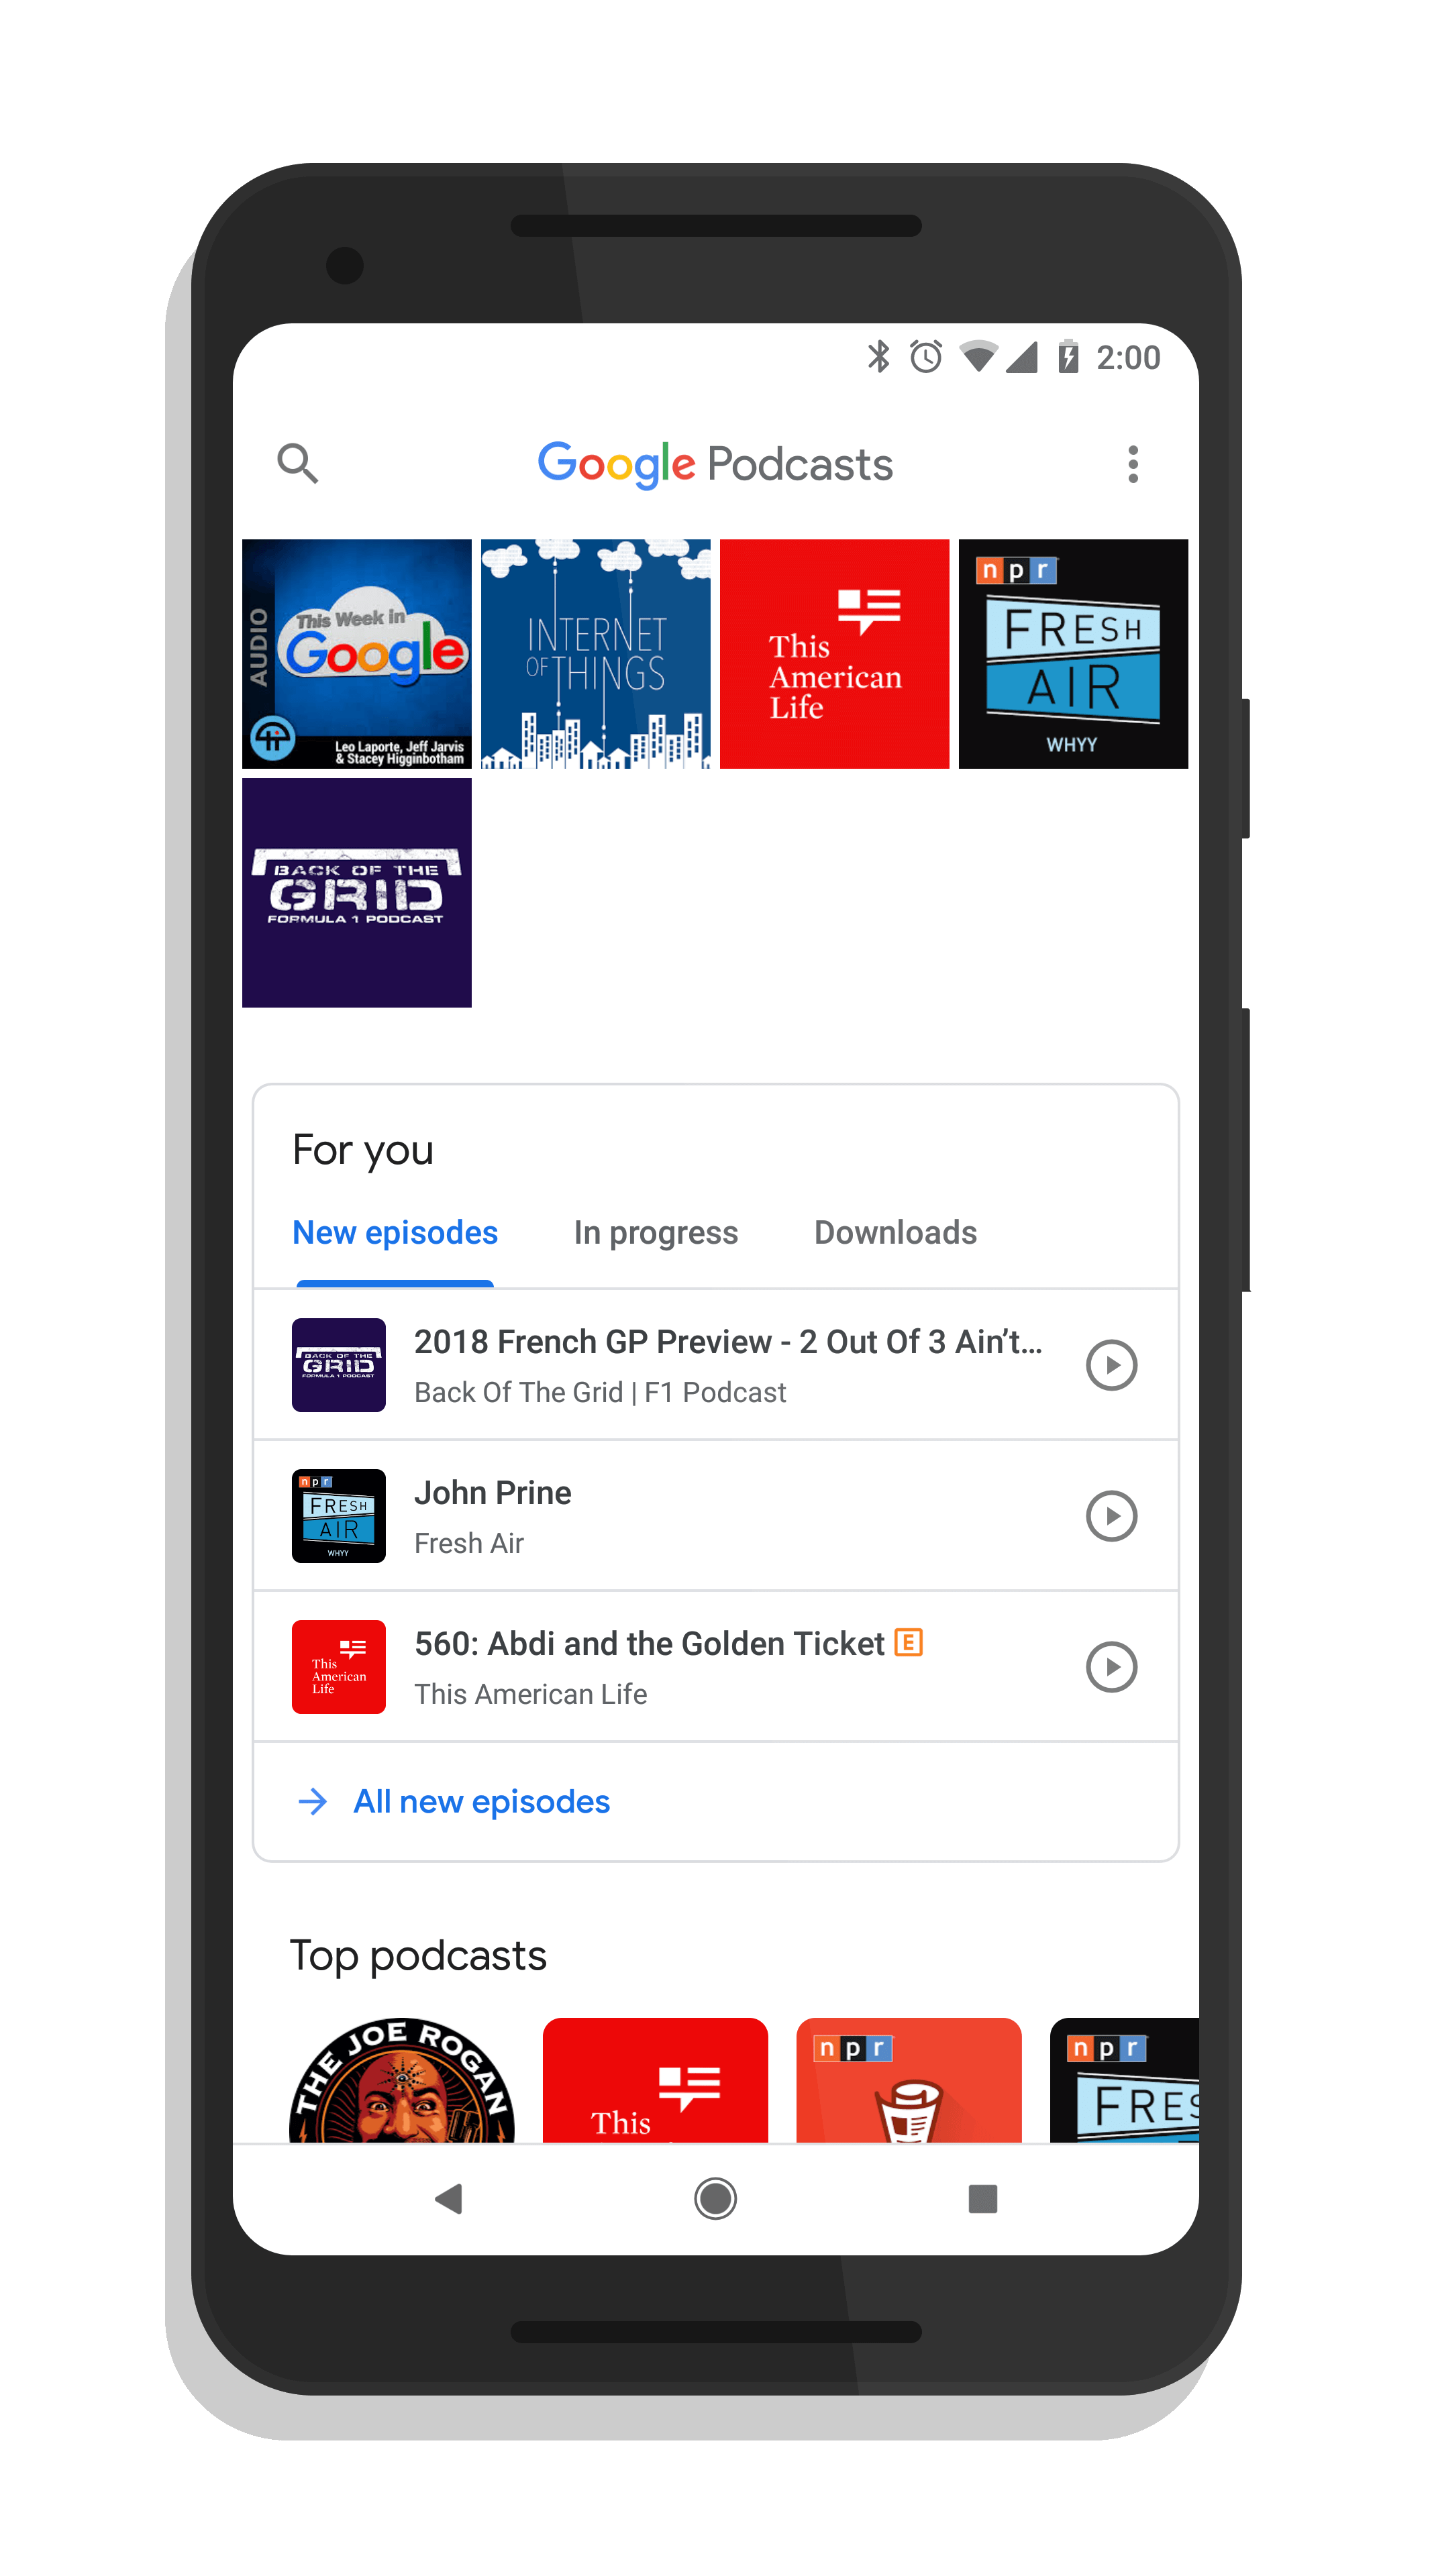 Google Podcasts Officially Launched for Android – ClintonFitch.com